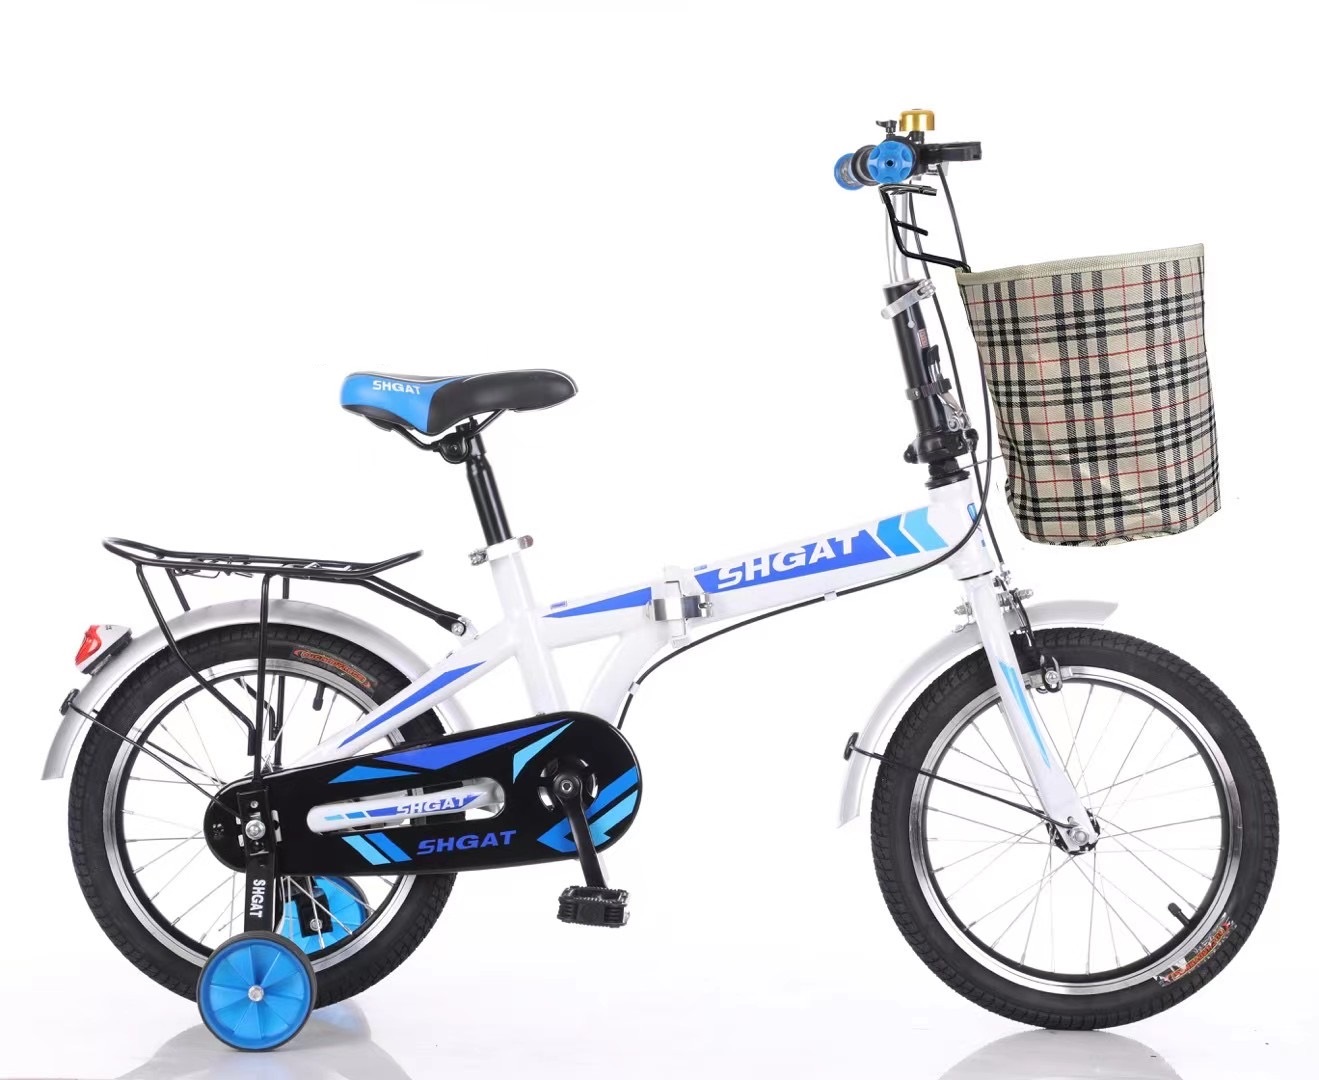 Low price for Second Hand Folding Bike - 2021 New Style Folding Bicycle,popular color – Beimudou